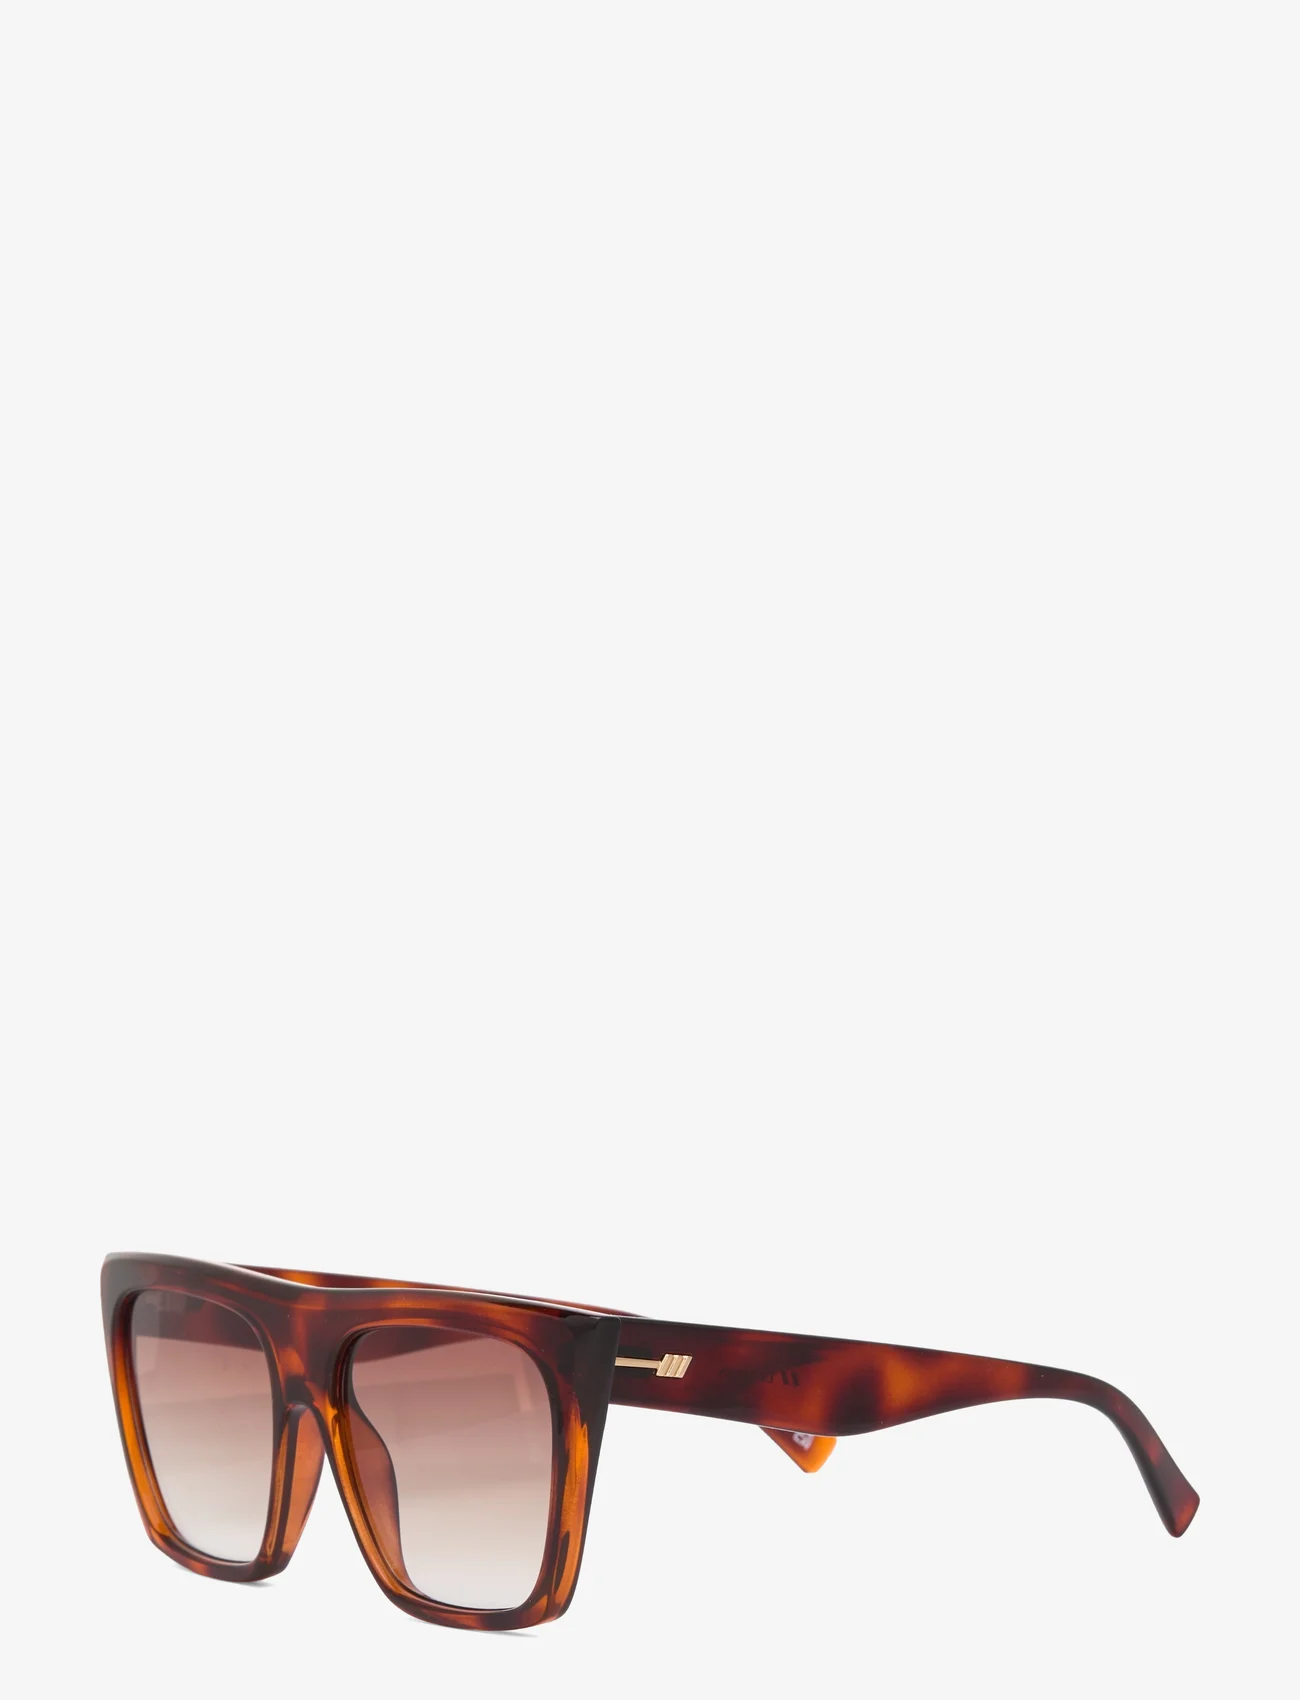 Le Specs - THE THIRST - toffee tort w/ brown grad lens - 1